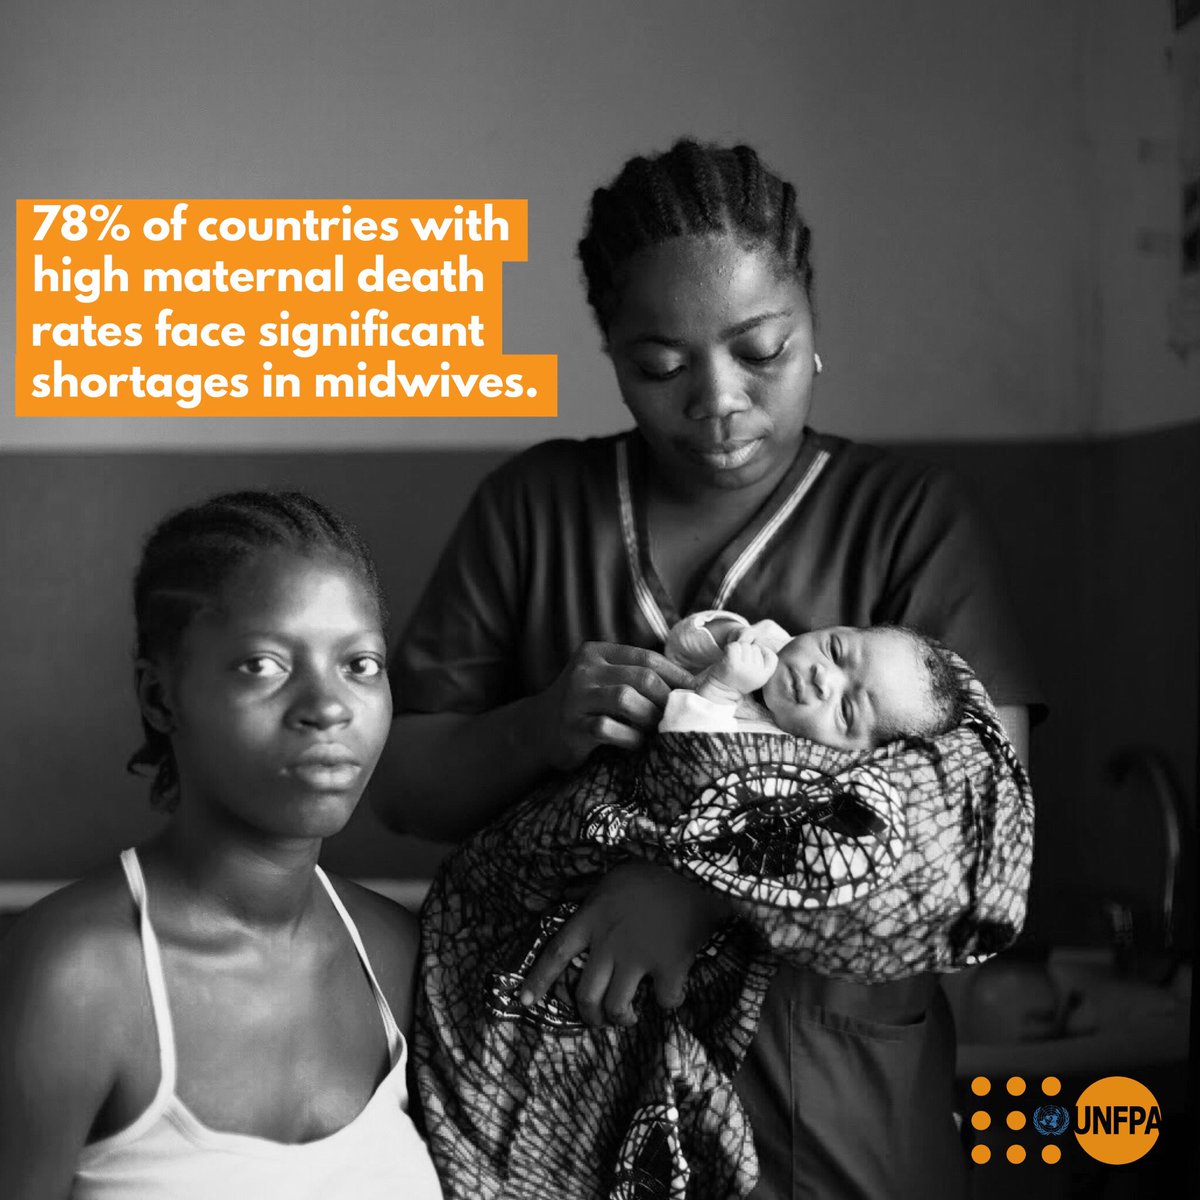 Today: May 5th is the International Day of the Midwife. Support midwives to #EndMaternalDeaths: unfpa.org/midwifery 
#IDM2018 #LiveYourDreamUG